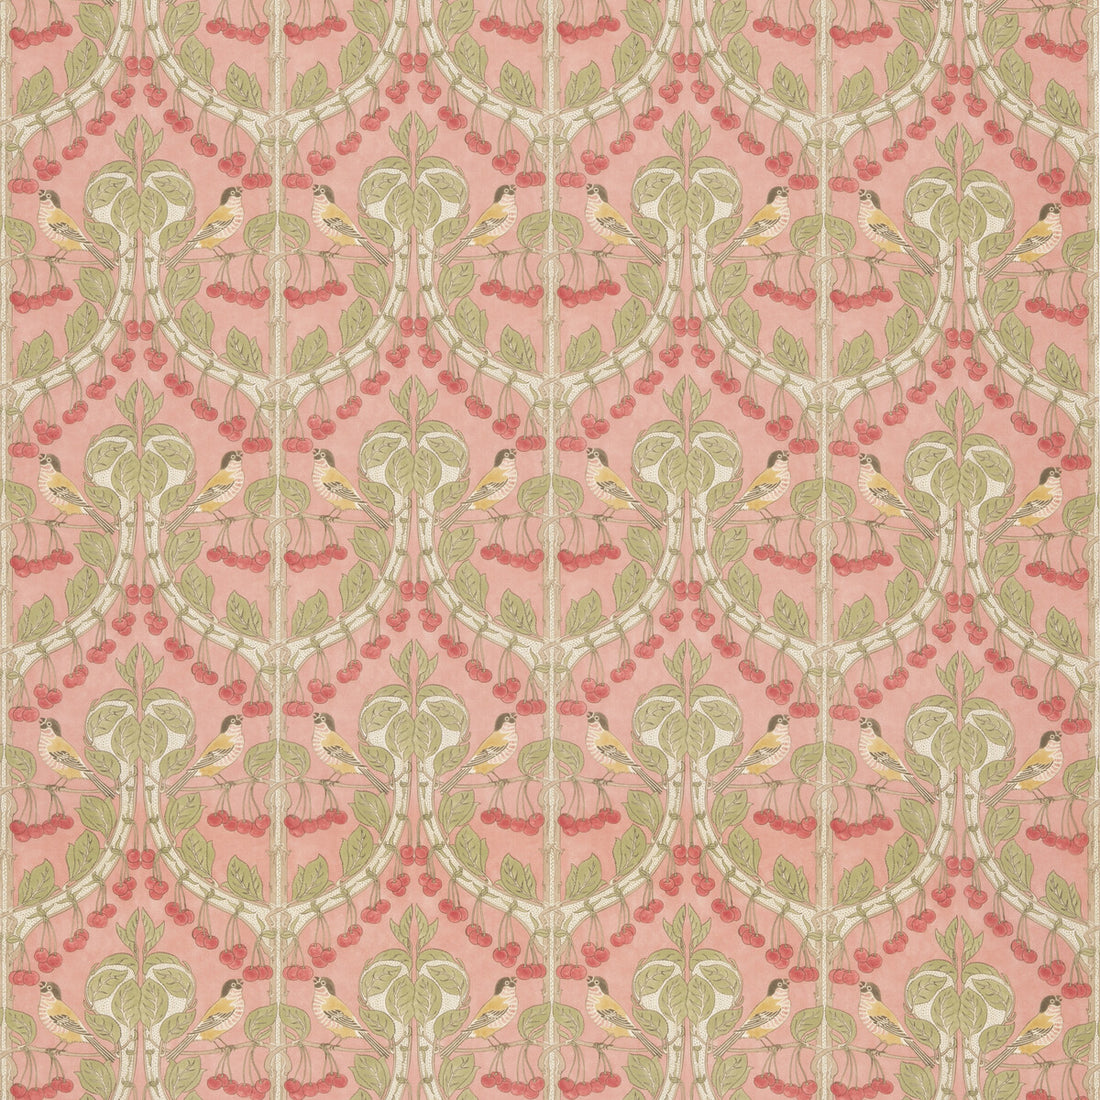 Birds &amp; Cherries Cotton fabric in coral color - pattern BP10967.5.0 - by G P &amp; J Baker in the Original Brantwood Fabric collection